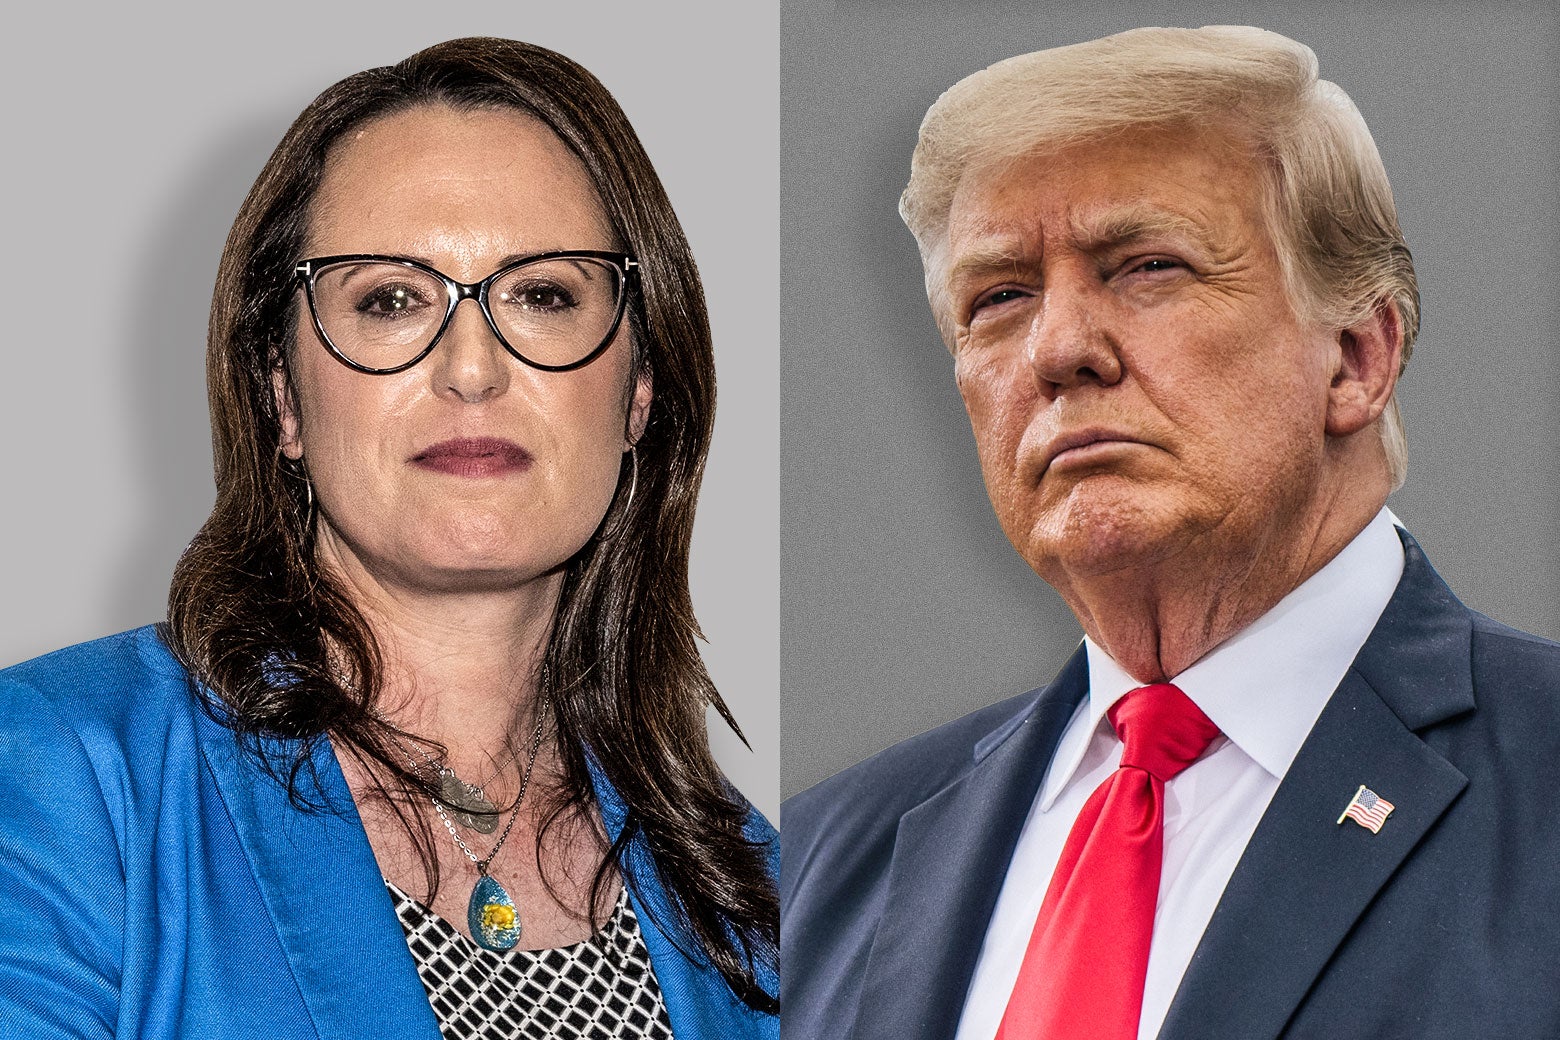 Maggie Haberman, a woman with brown hair and glasses, staring at the camera. Next to her is Donald Trump, doing the squinting thing he does